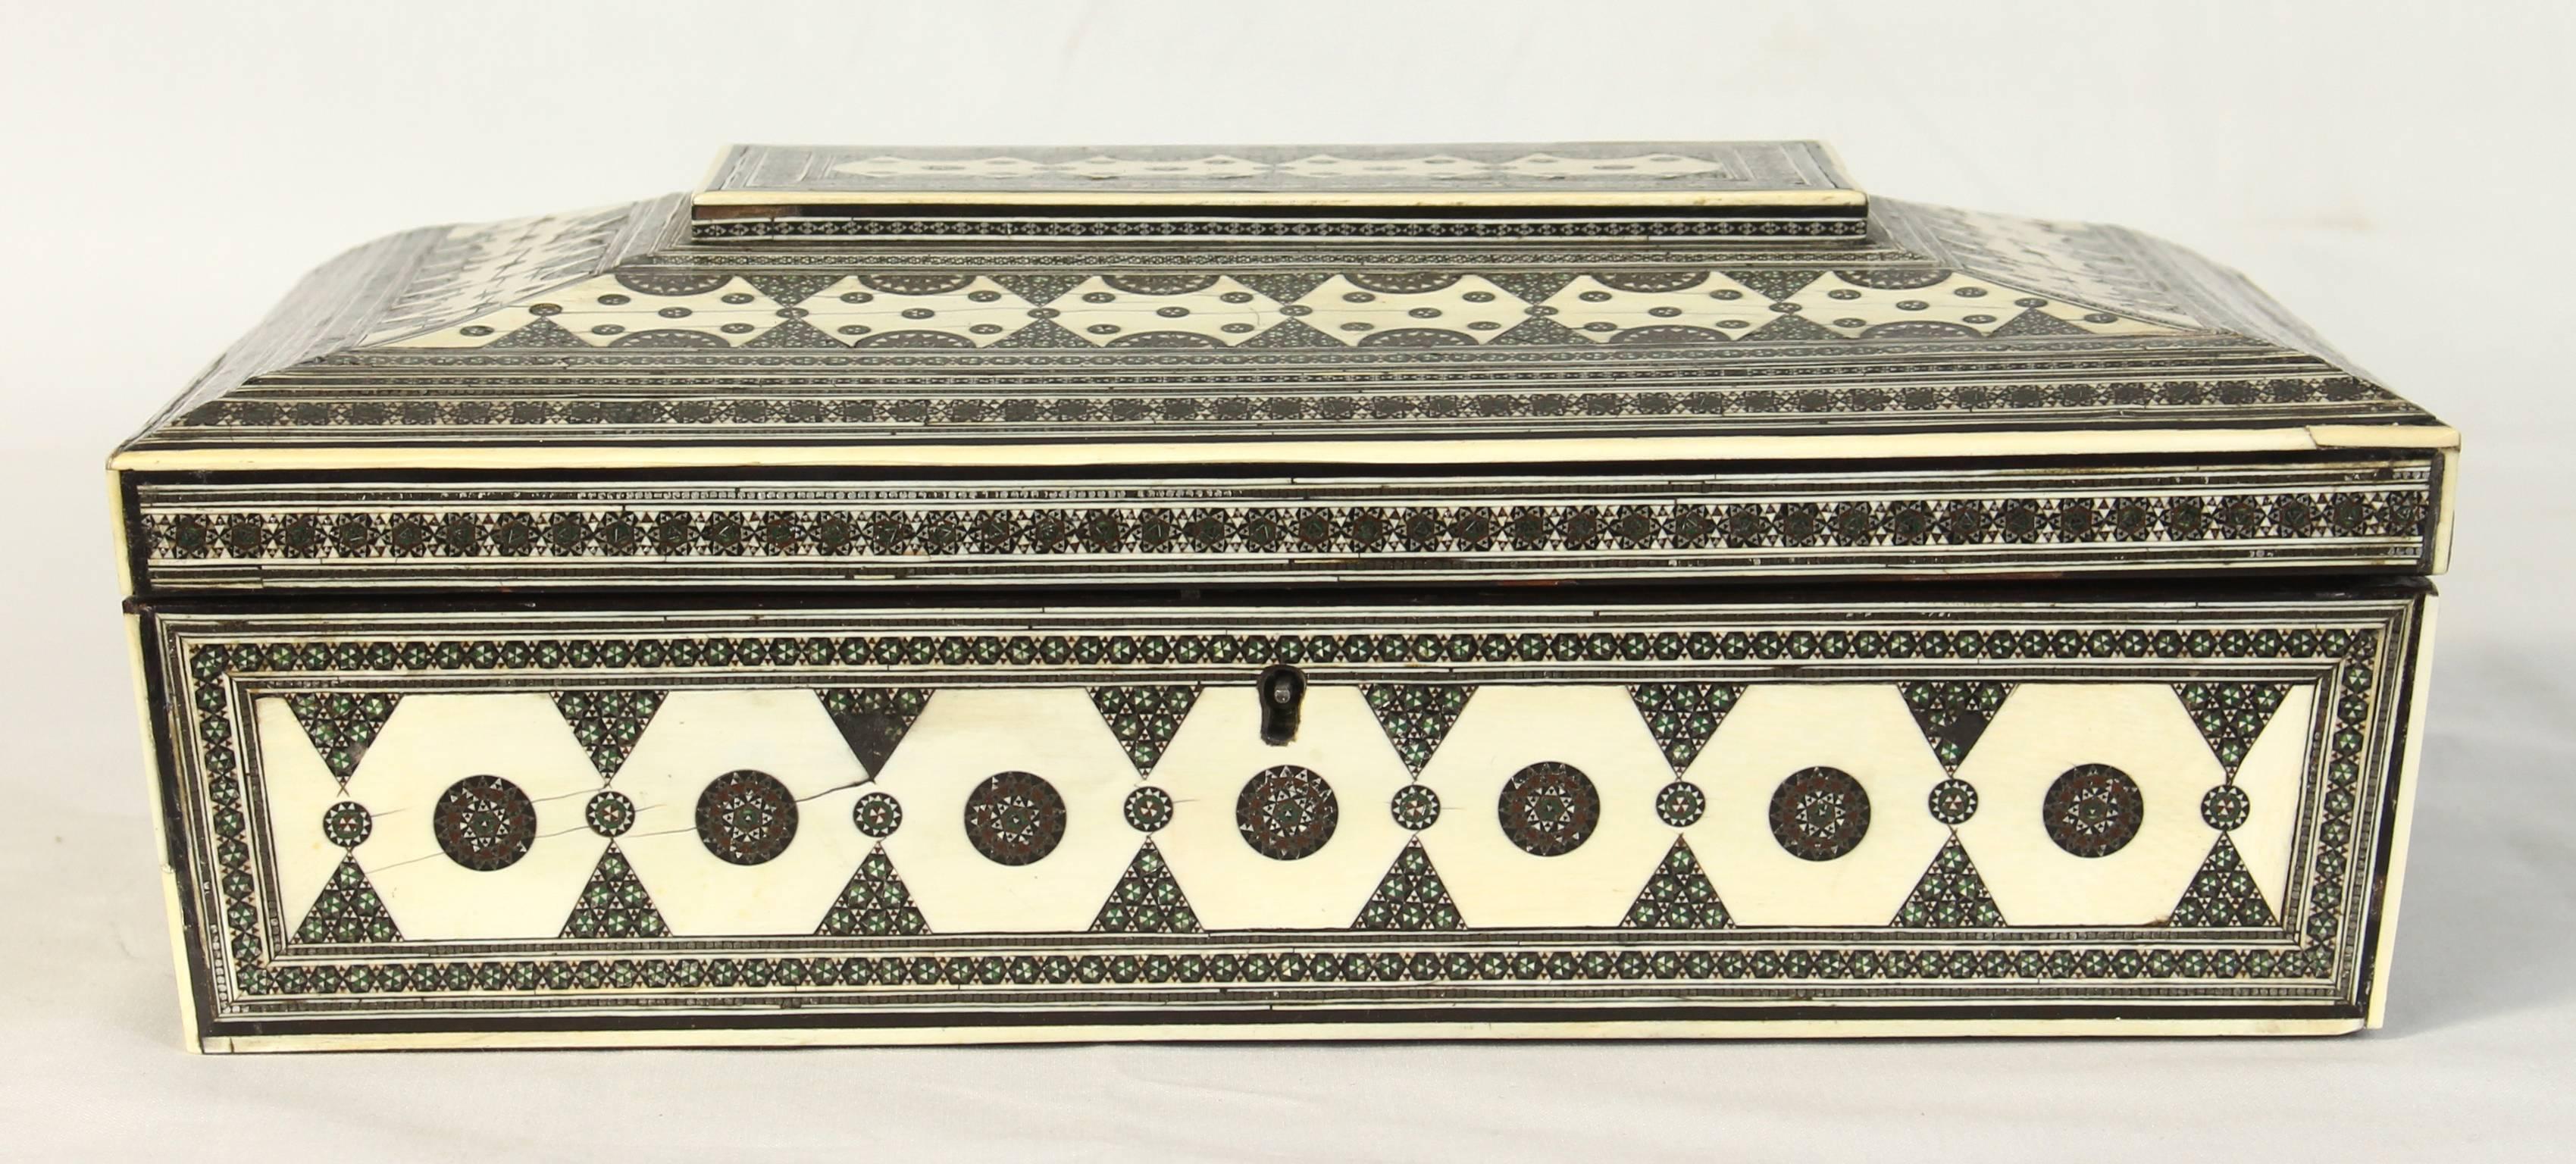 A large early-19th century sarcophagus shape Anglo-Indian bone and sadeli mosaic sewing box fitted with various compartments and cotton reels.